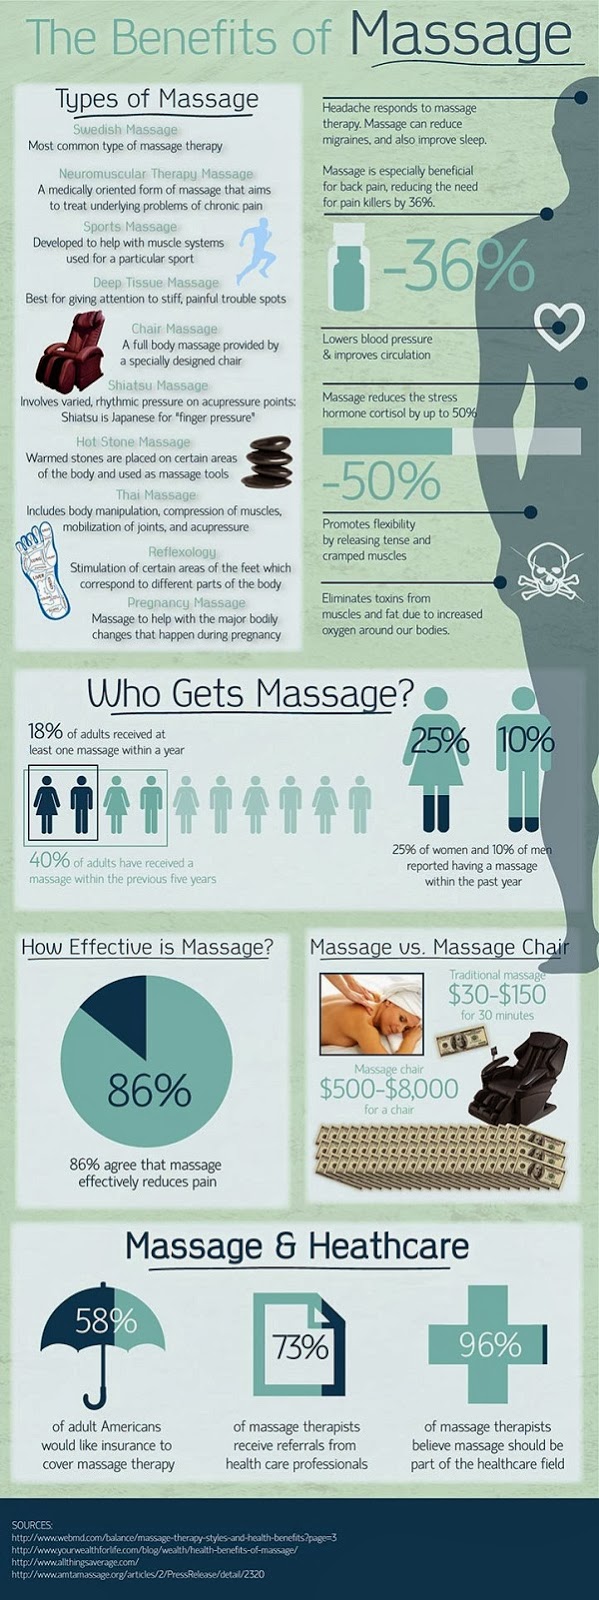 http://dailyinfographic.com/the-benefits-of-massage-infographic